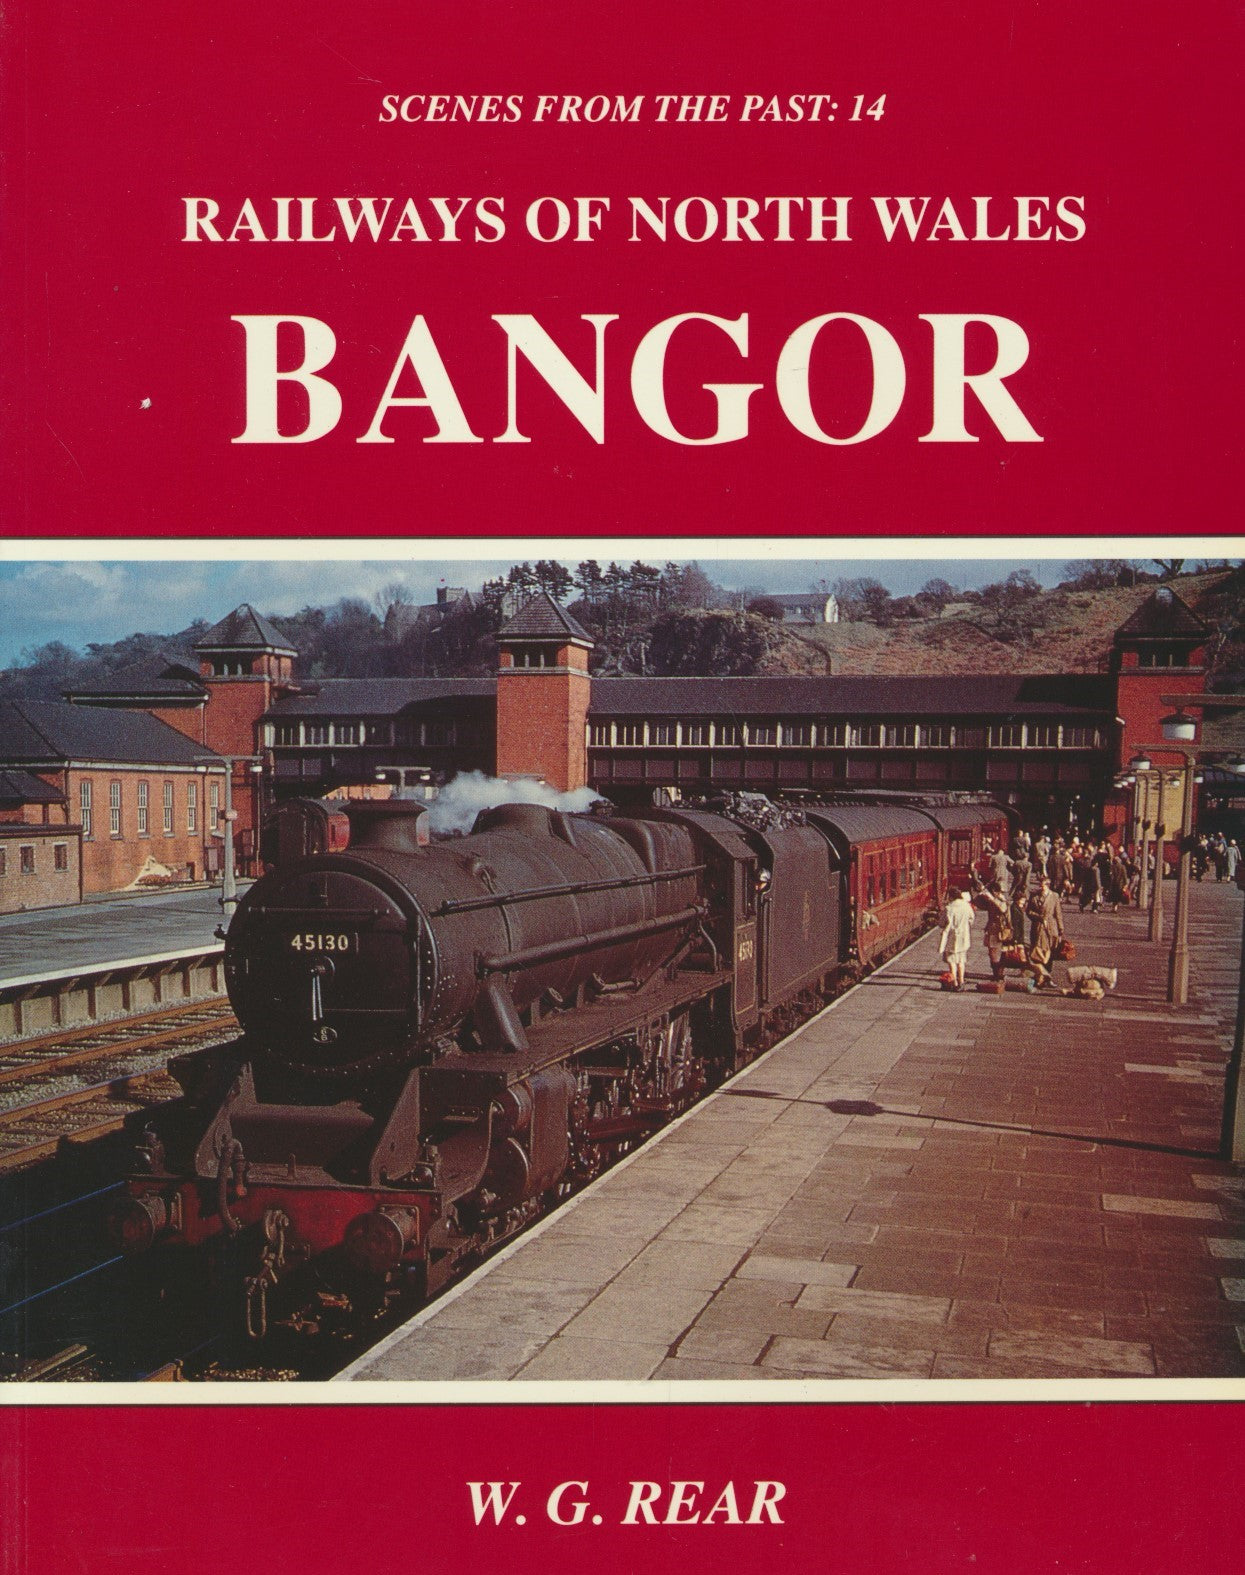 Railways of North Wales: Bangor (Scenes From The Past 14)